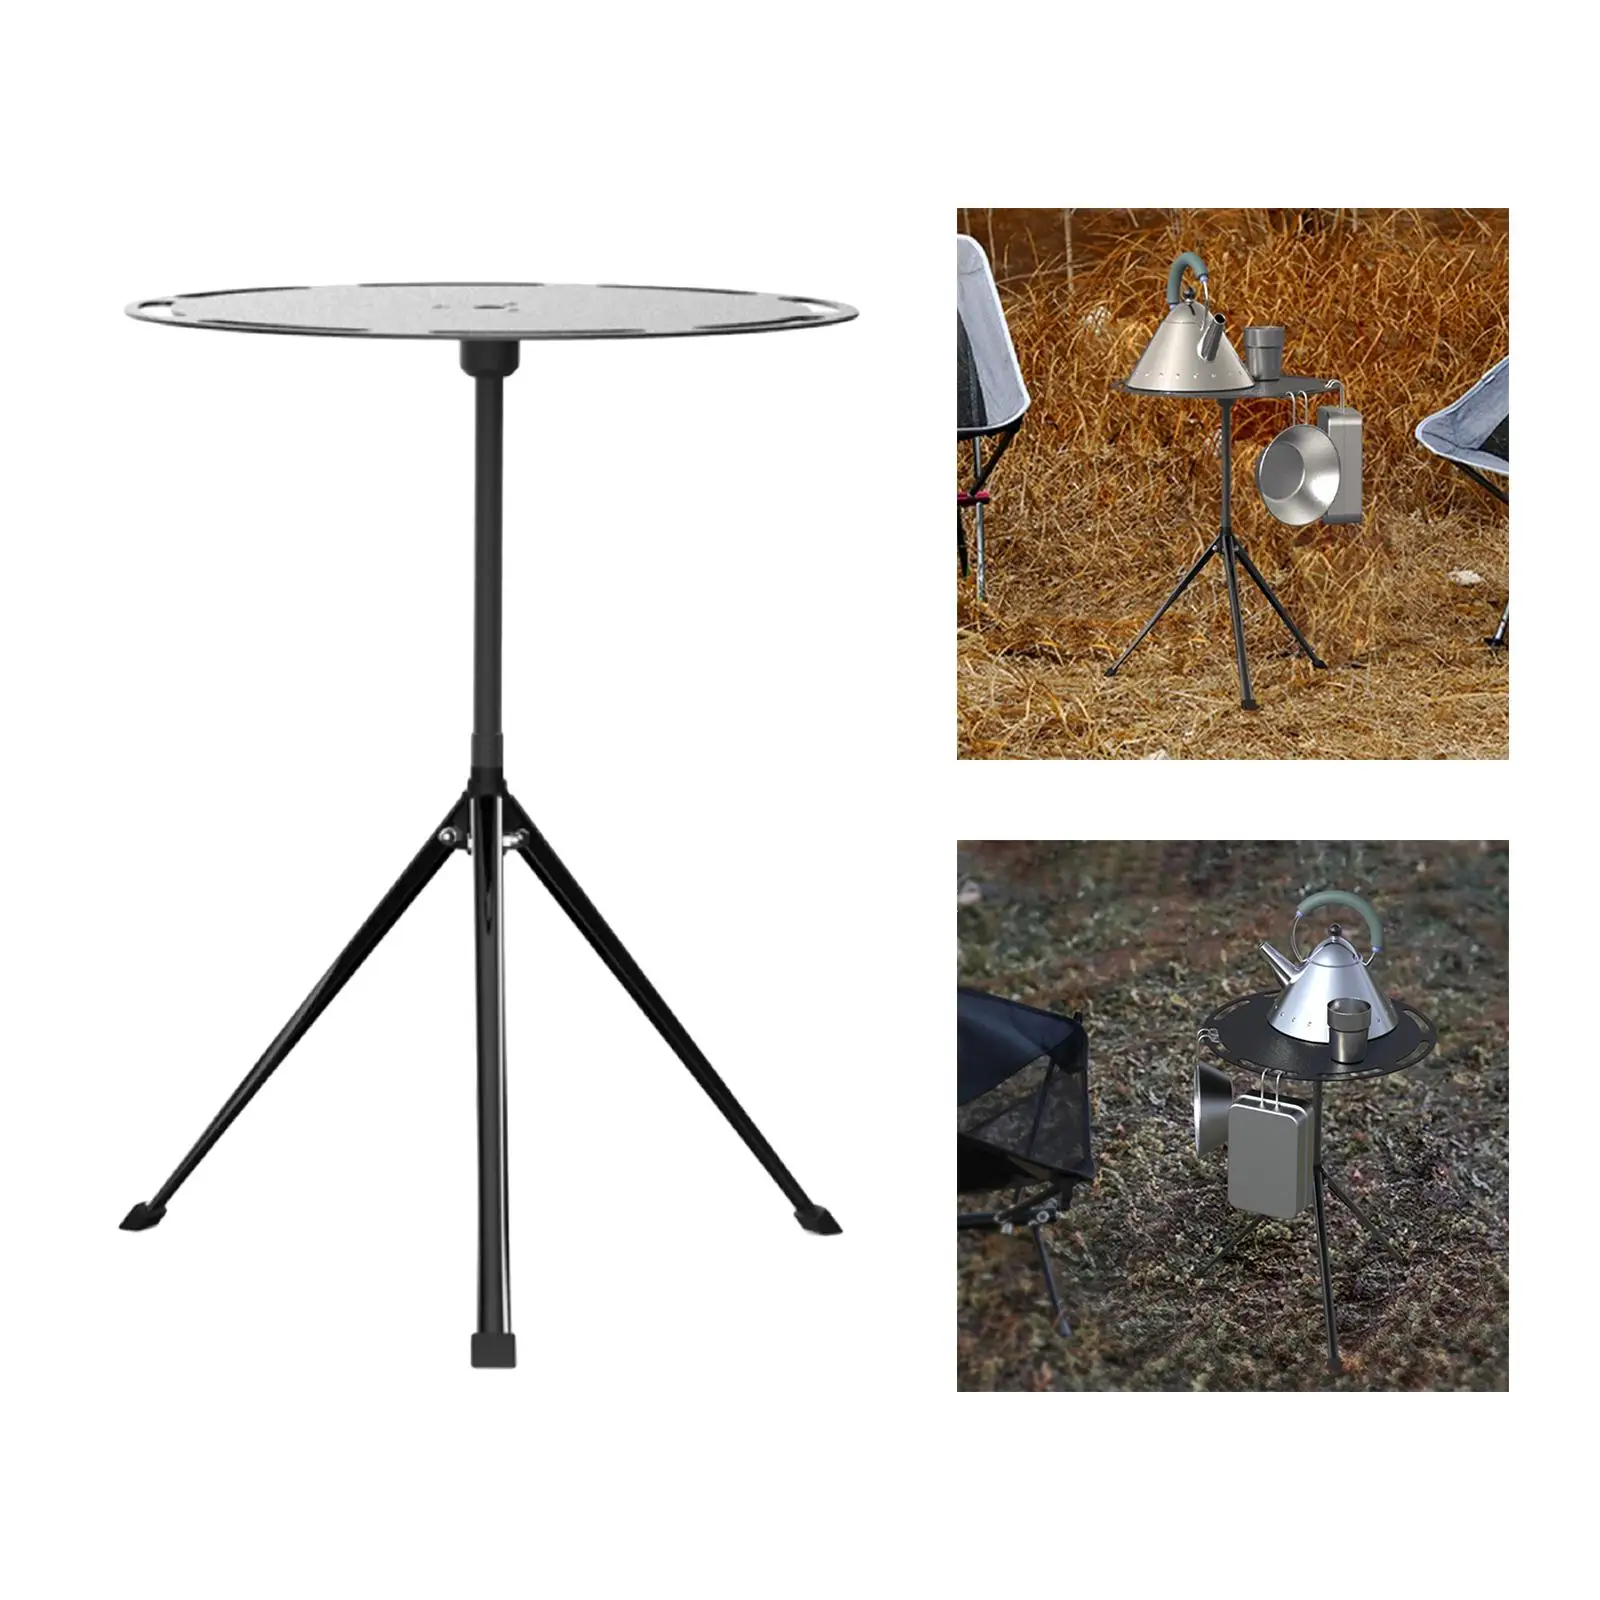 Retractable Camping Table, Furniture Durable  Dining Table Three Legged Folding Desk for Picnic  Kitchen BBQ Garden